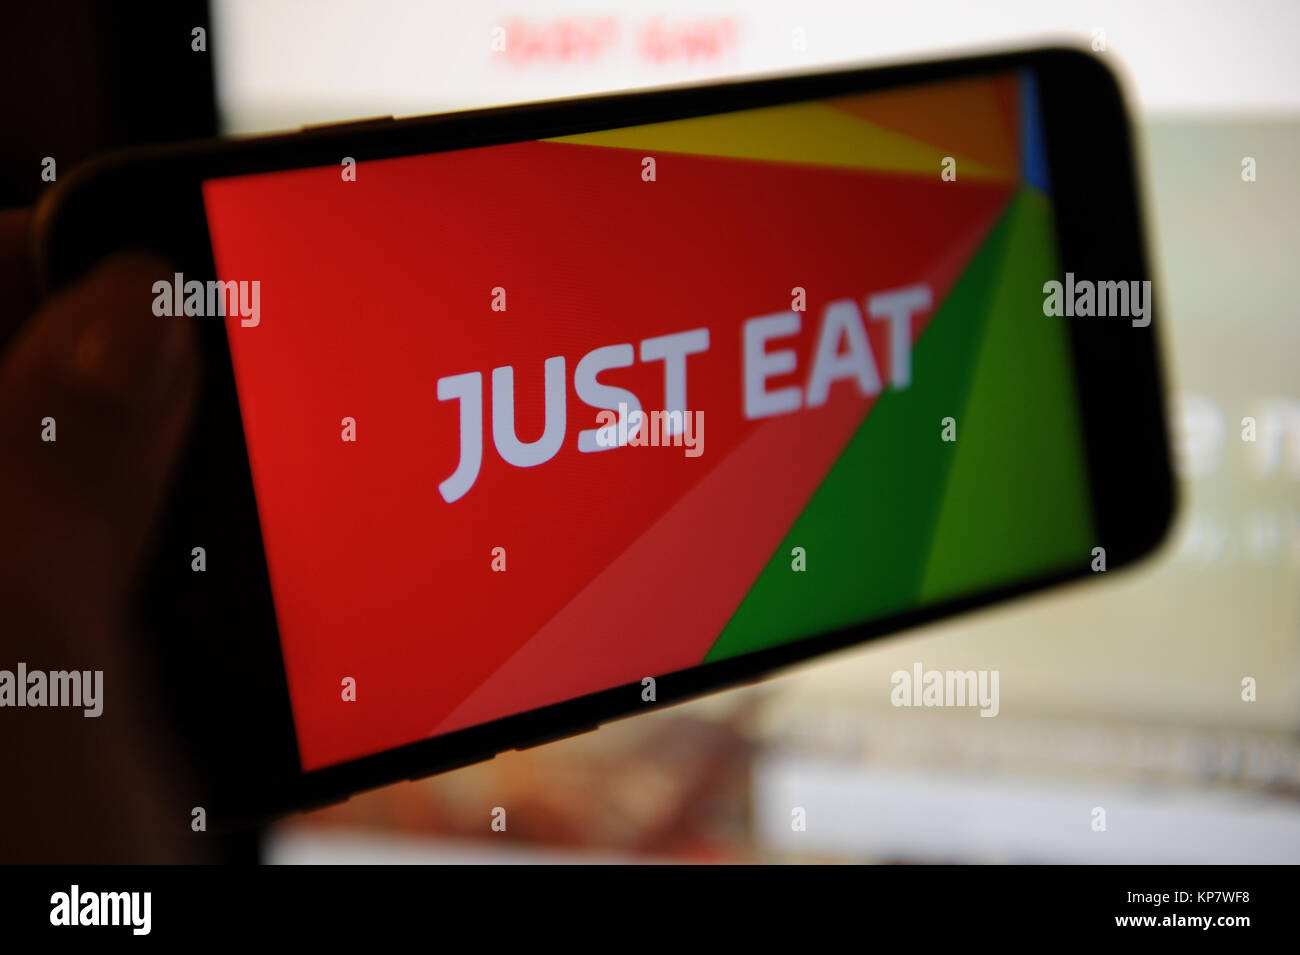 The Just East online food ordering company logo on a phone Stock Photo